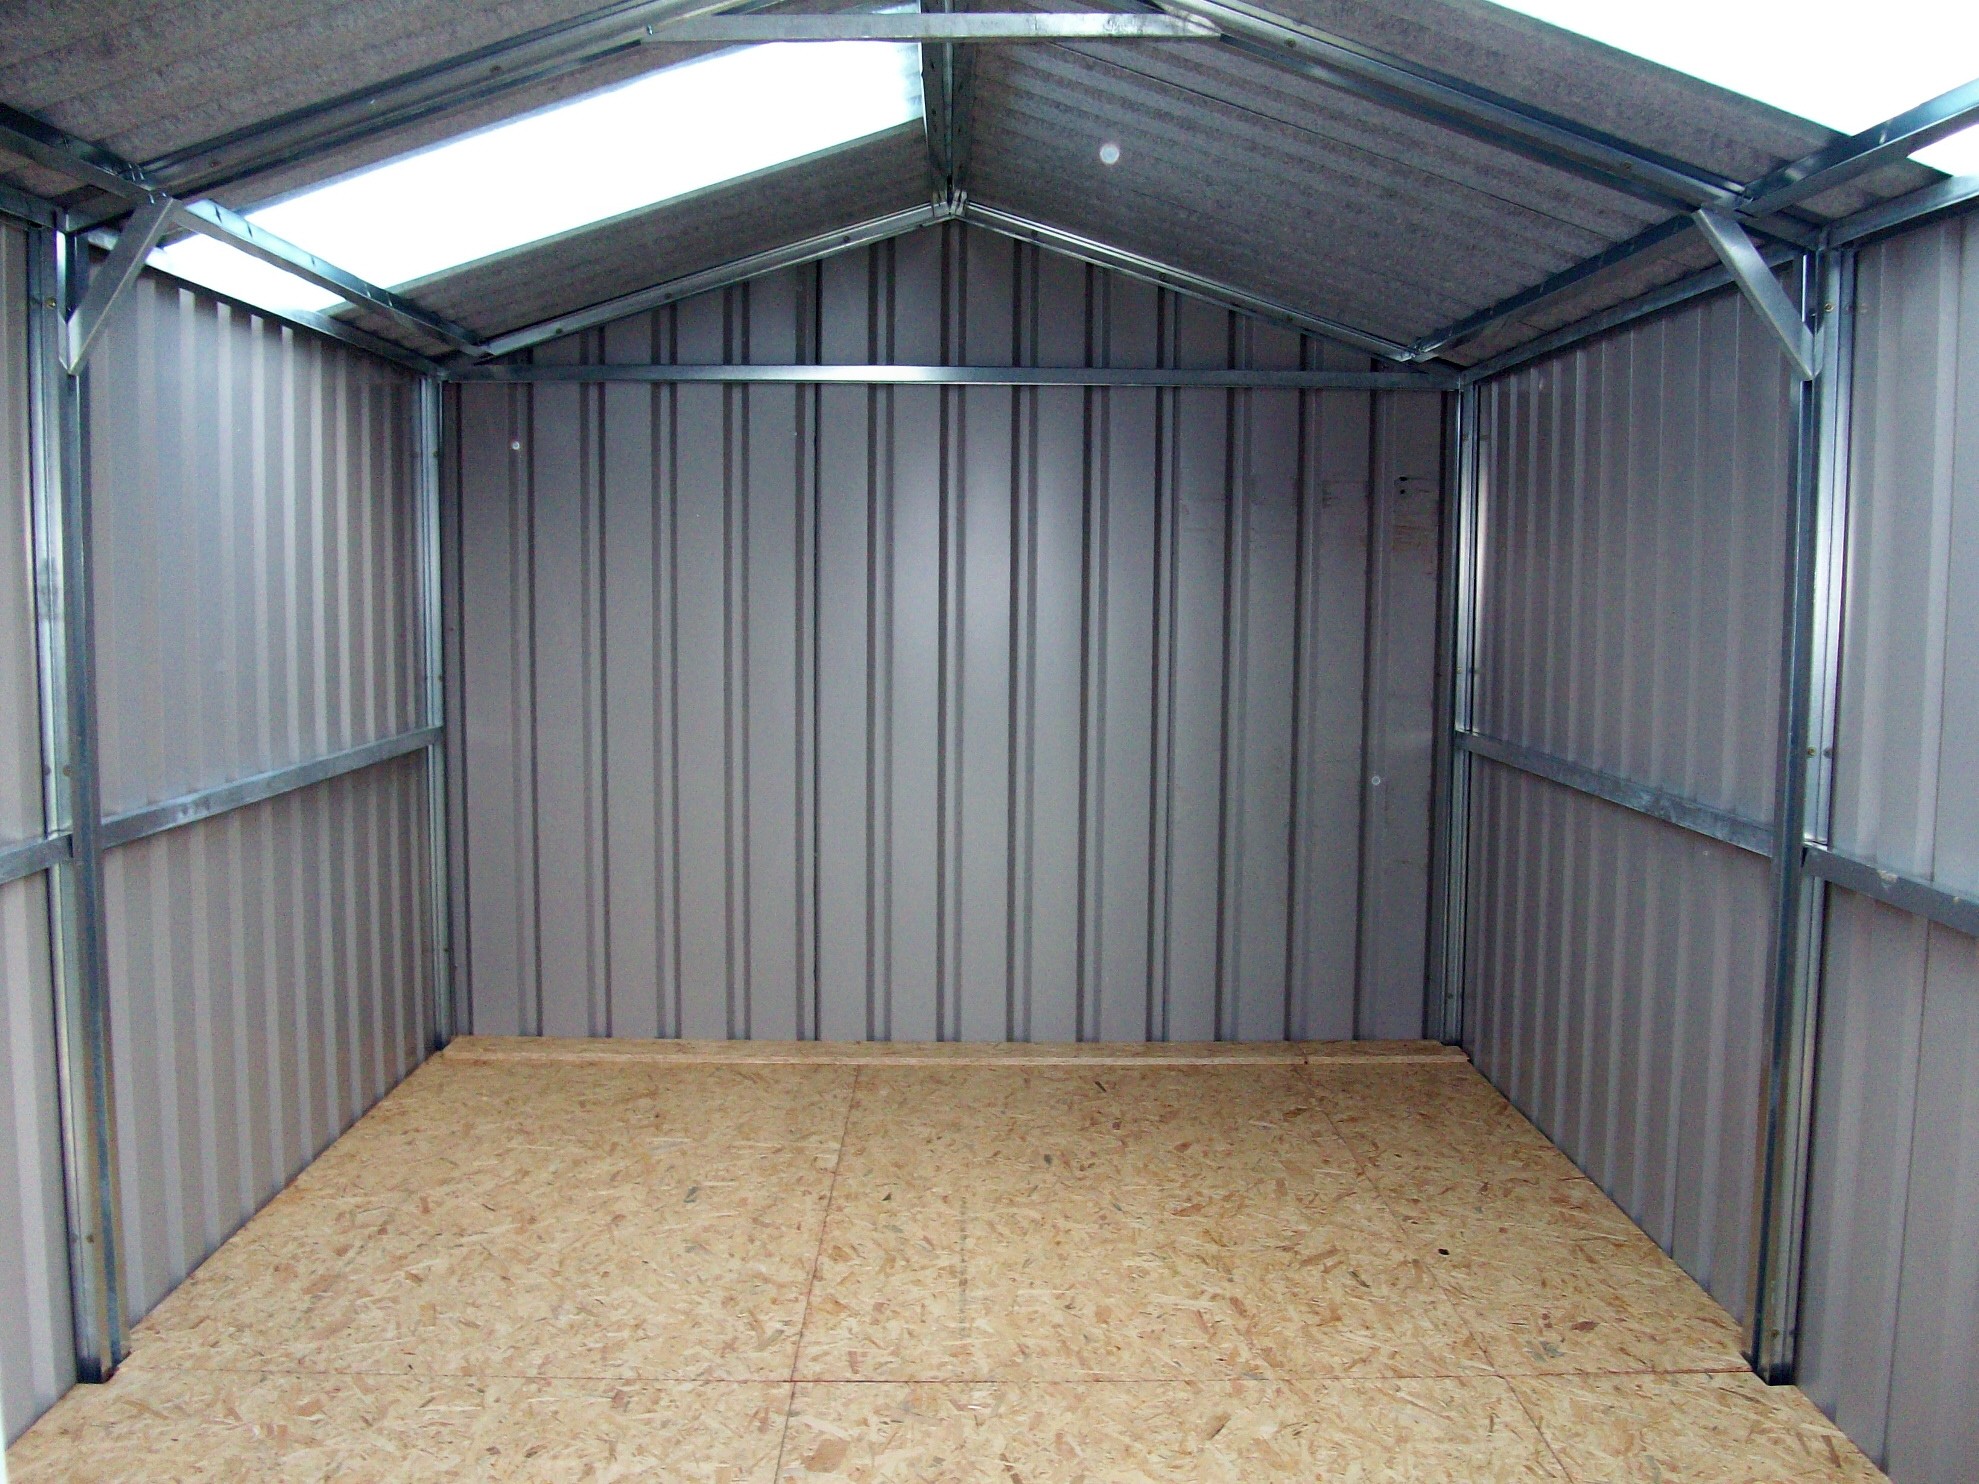 Building a Metal Shed - Is It a Good DYI Project ...